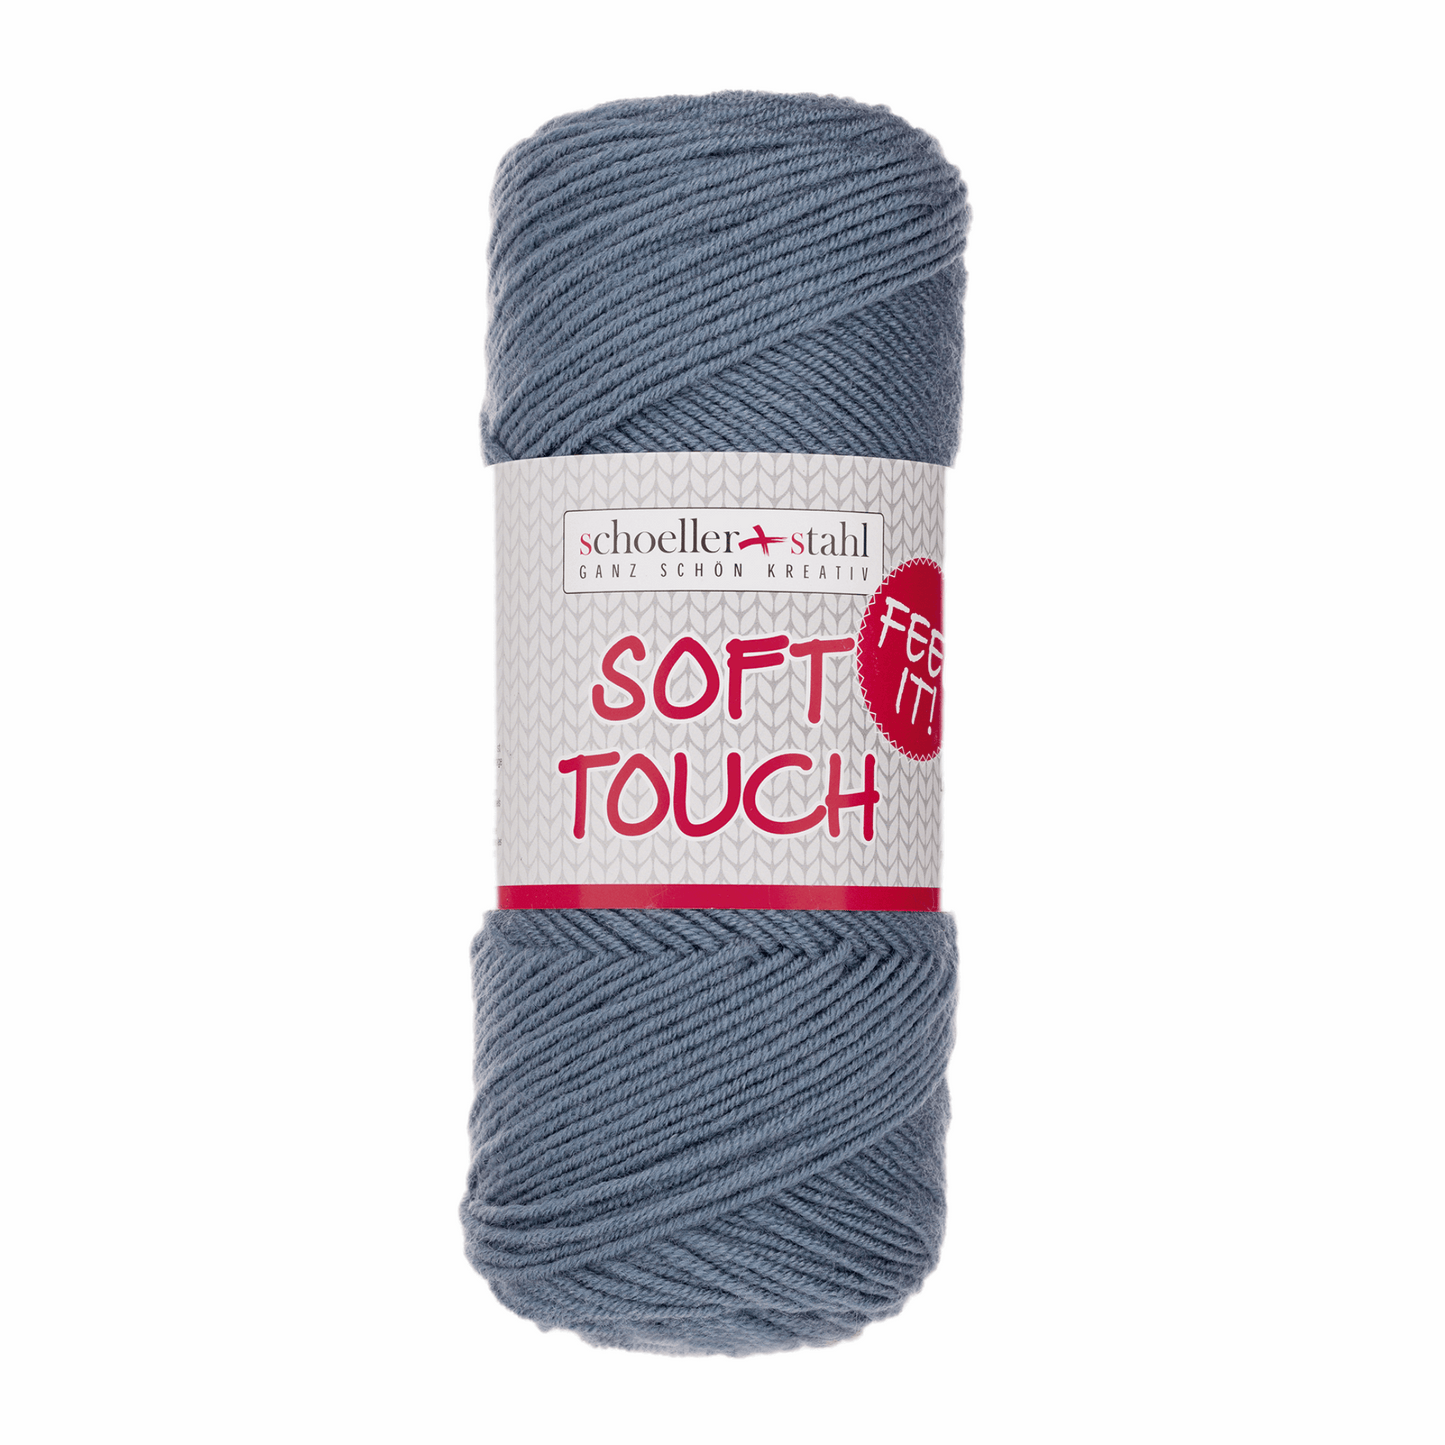 Soft touch 100g pullskin, 90283, Farbe 13, jeans